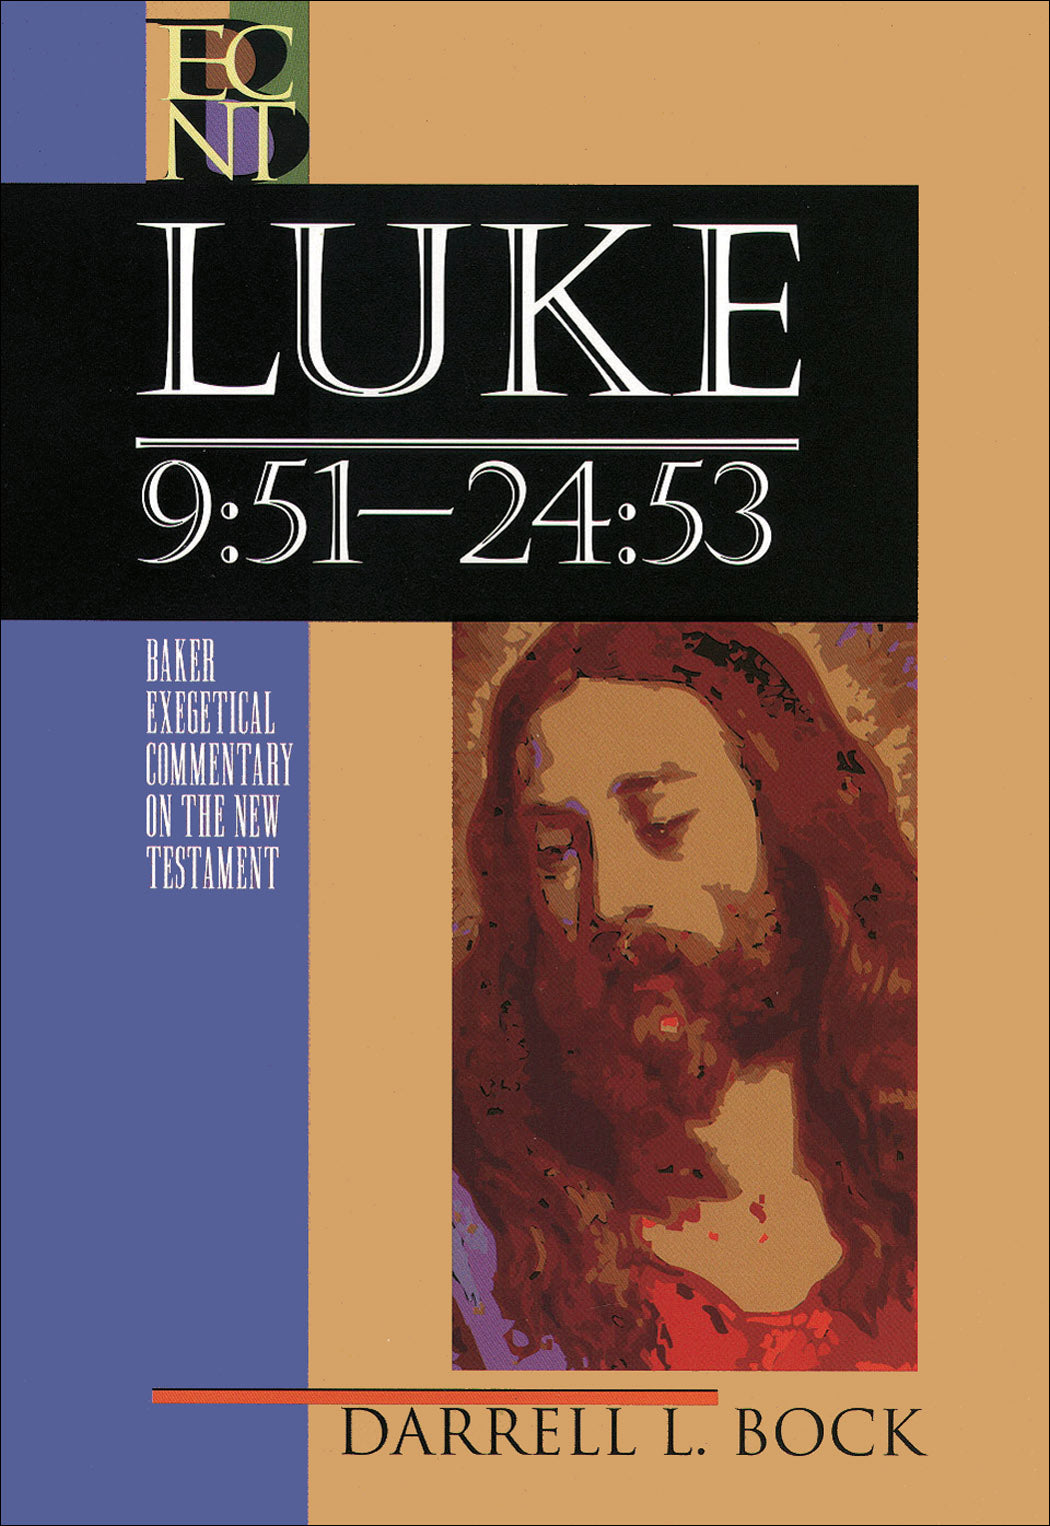 Image of Luke: Baker Exegetical Commentary on the New Testament other